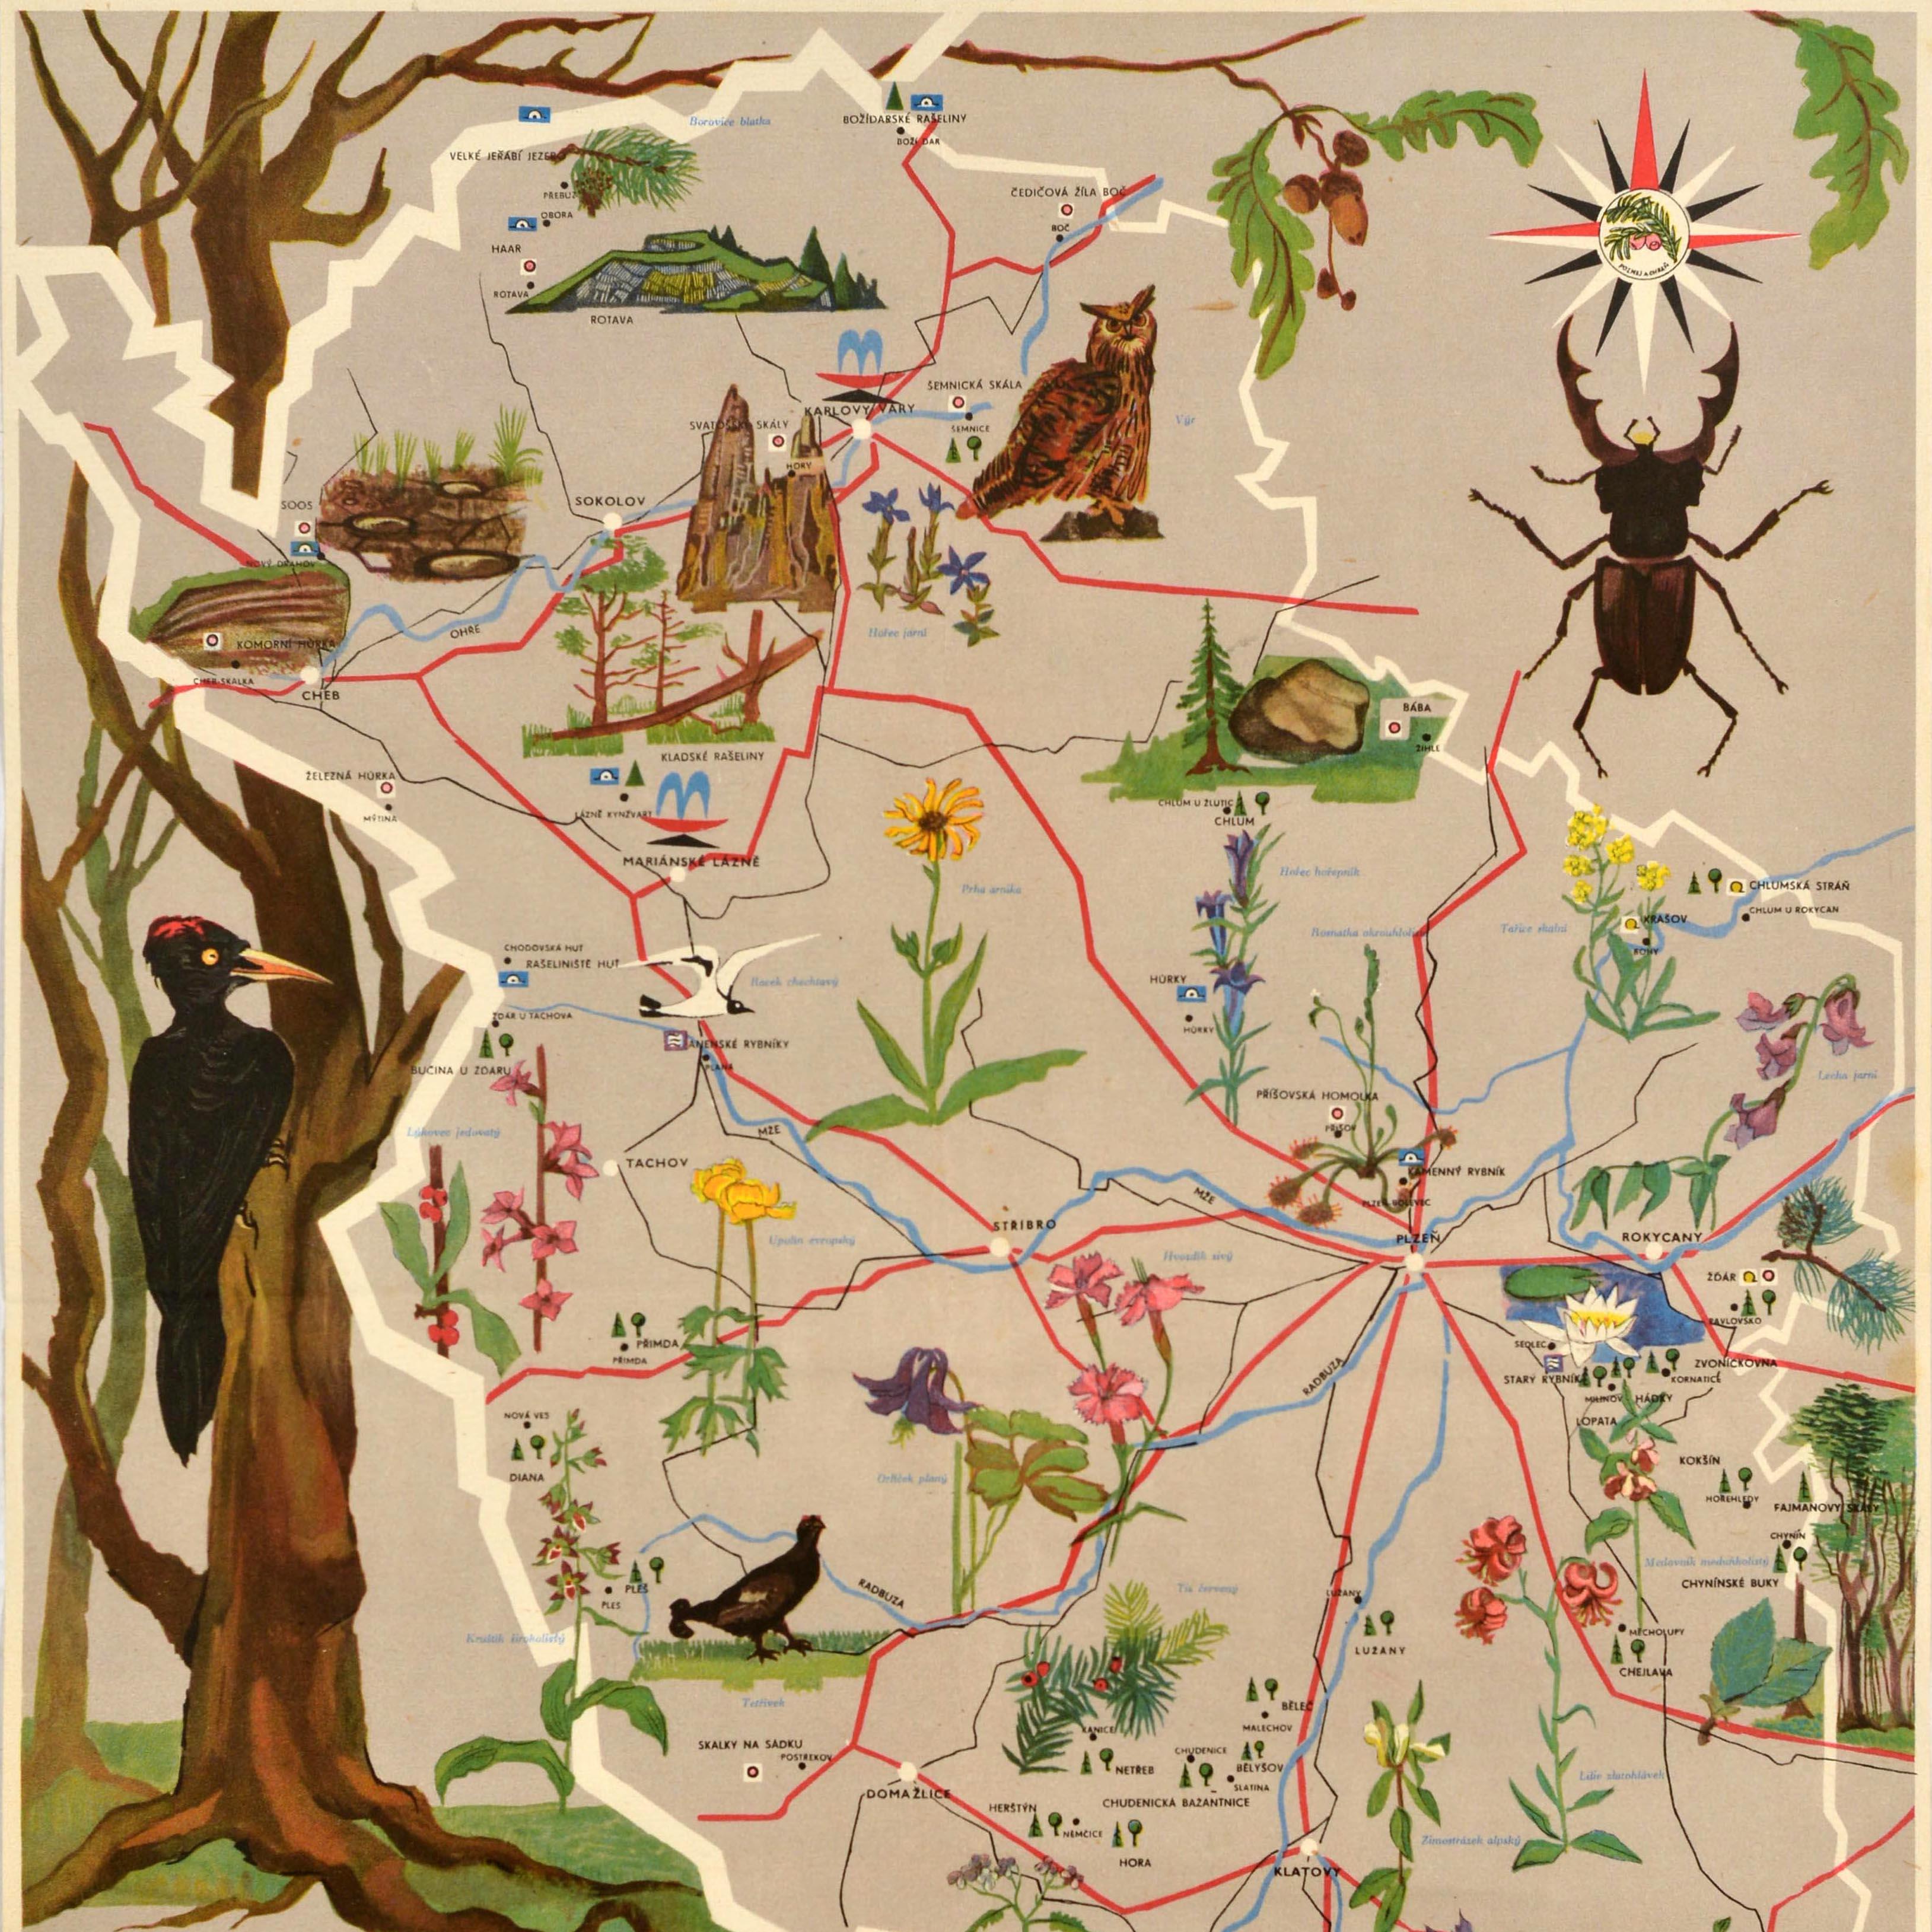 Original vintage travel poster for the West Bohemian Region Nature Reserve / Zapadocesky Kraj Prirodni Rezervace featuring a pictorial map of the area showing various flora and fauna species including different birds and insects, colourful flowers